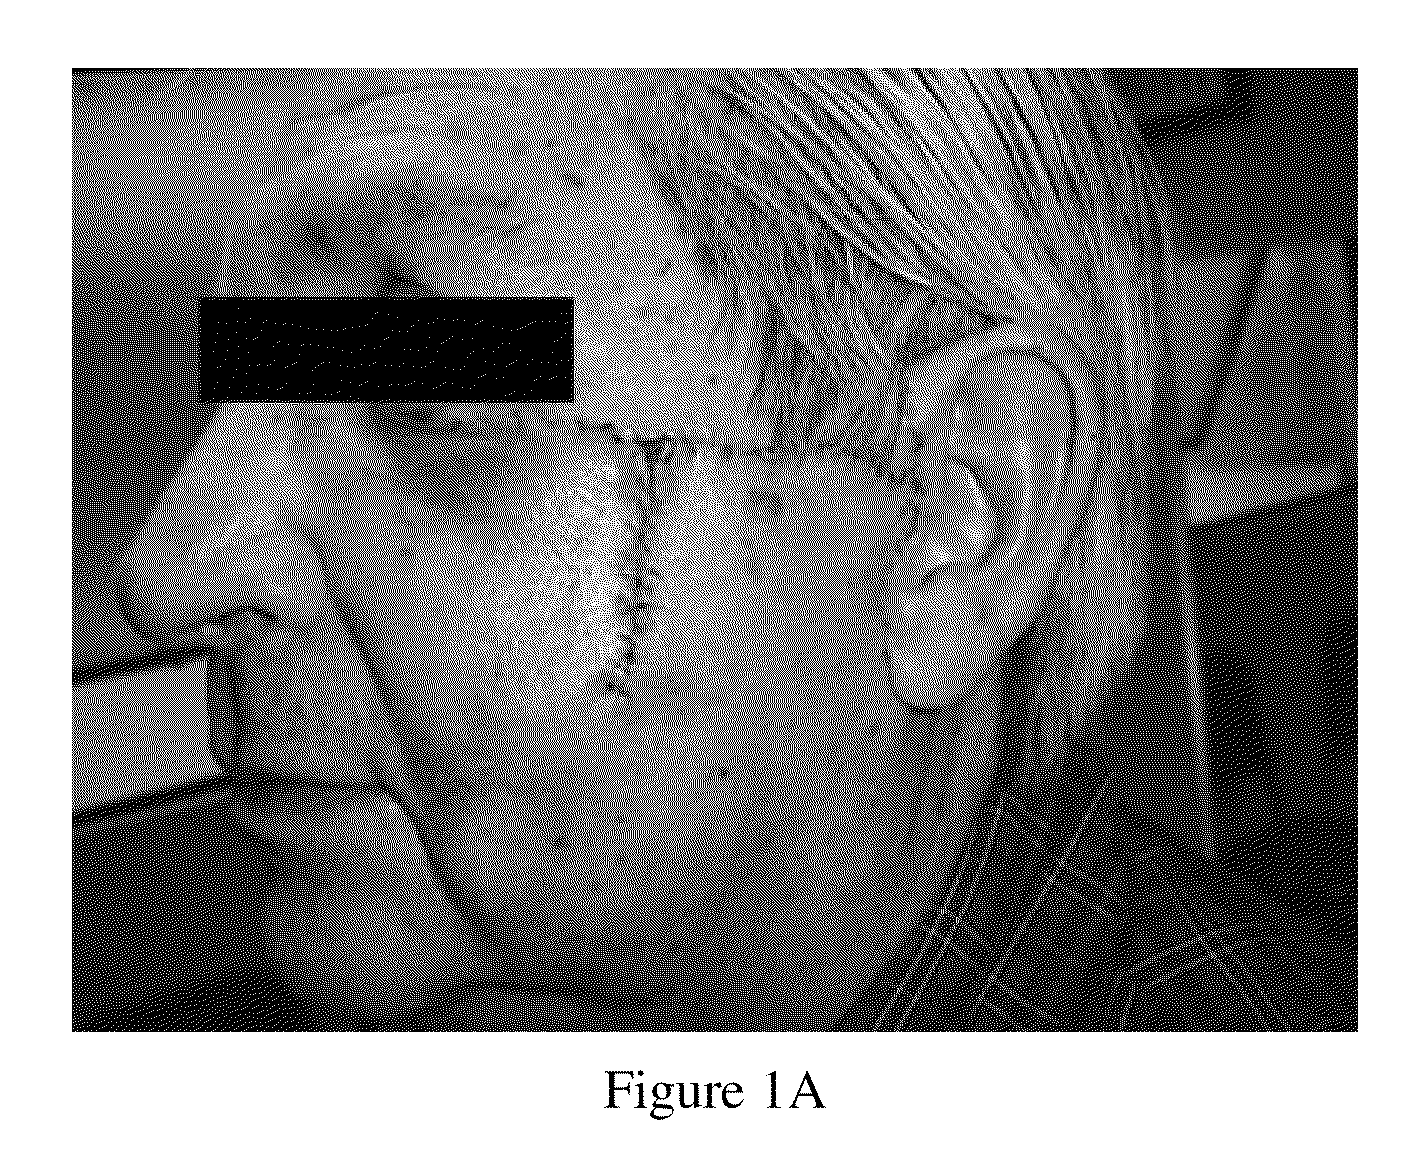 Silicone gel-based compositions for wound healing and scar reduction